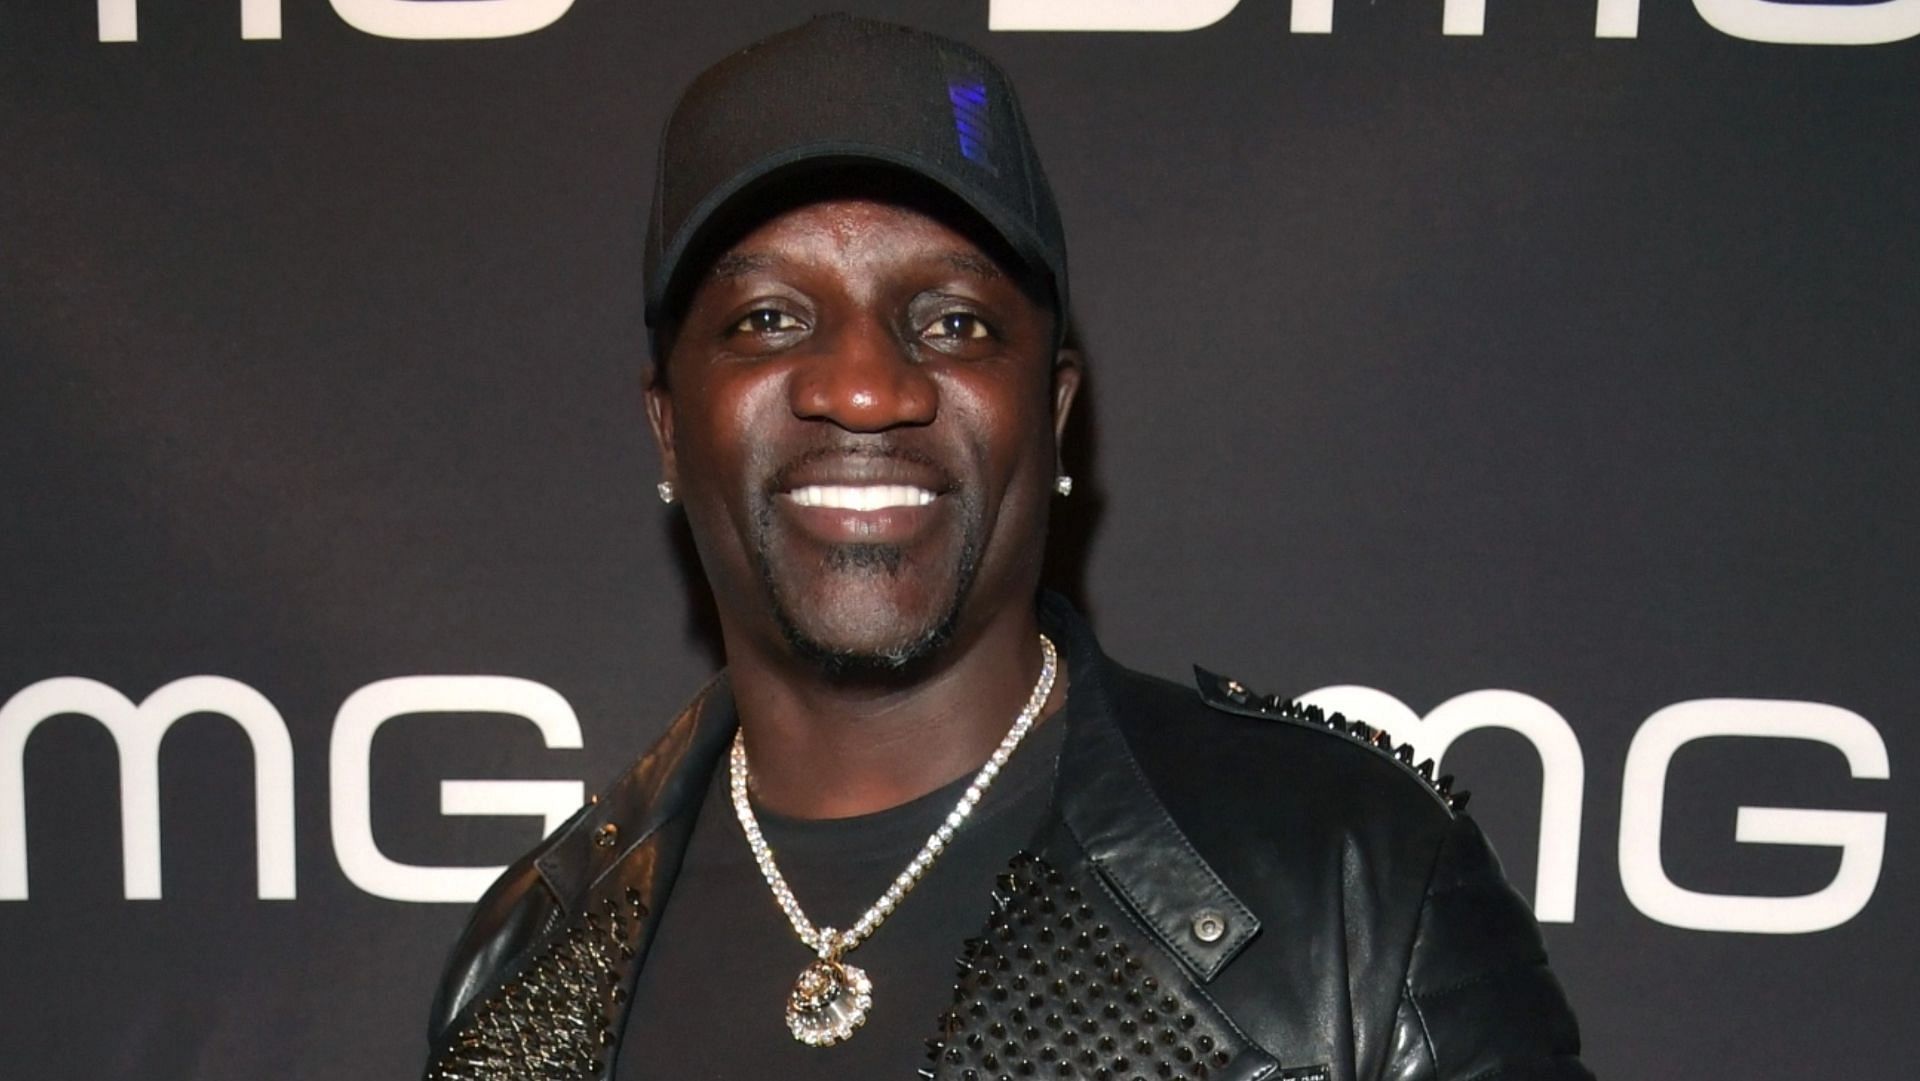 Akon was previously slammed online for supporting Nick Cannon